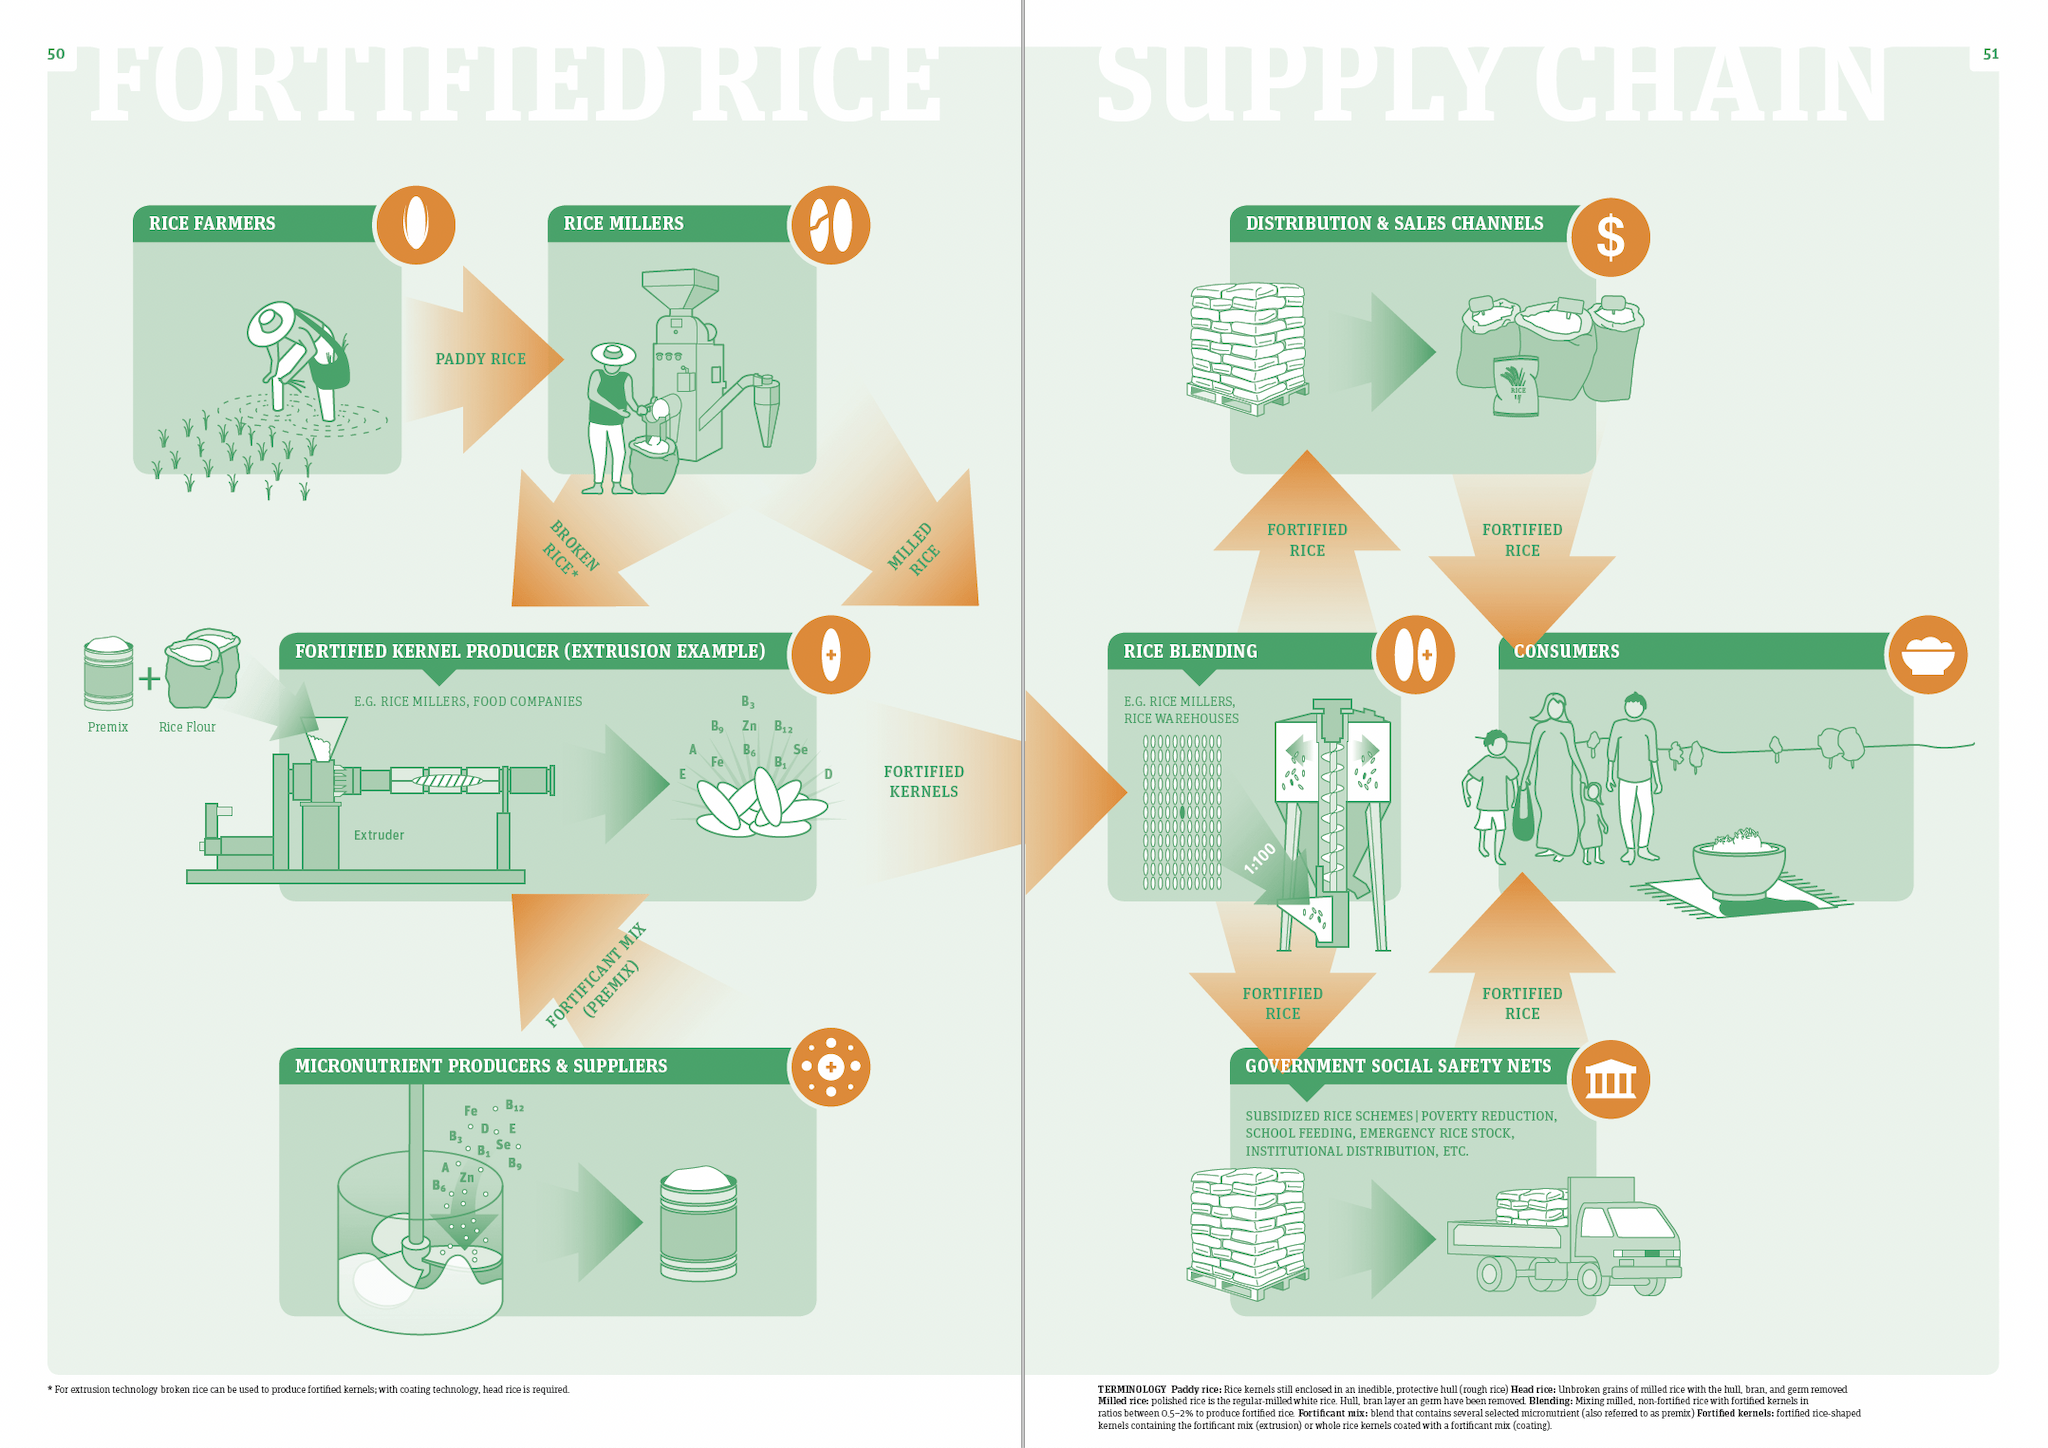 Fortified Rice Supply Chain